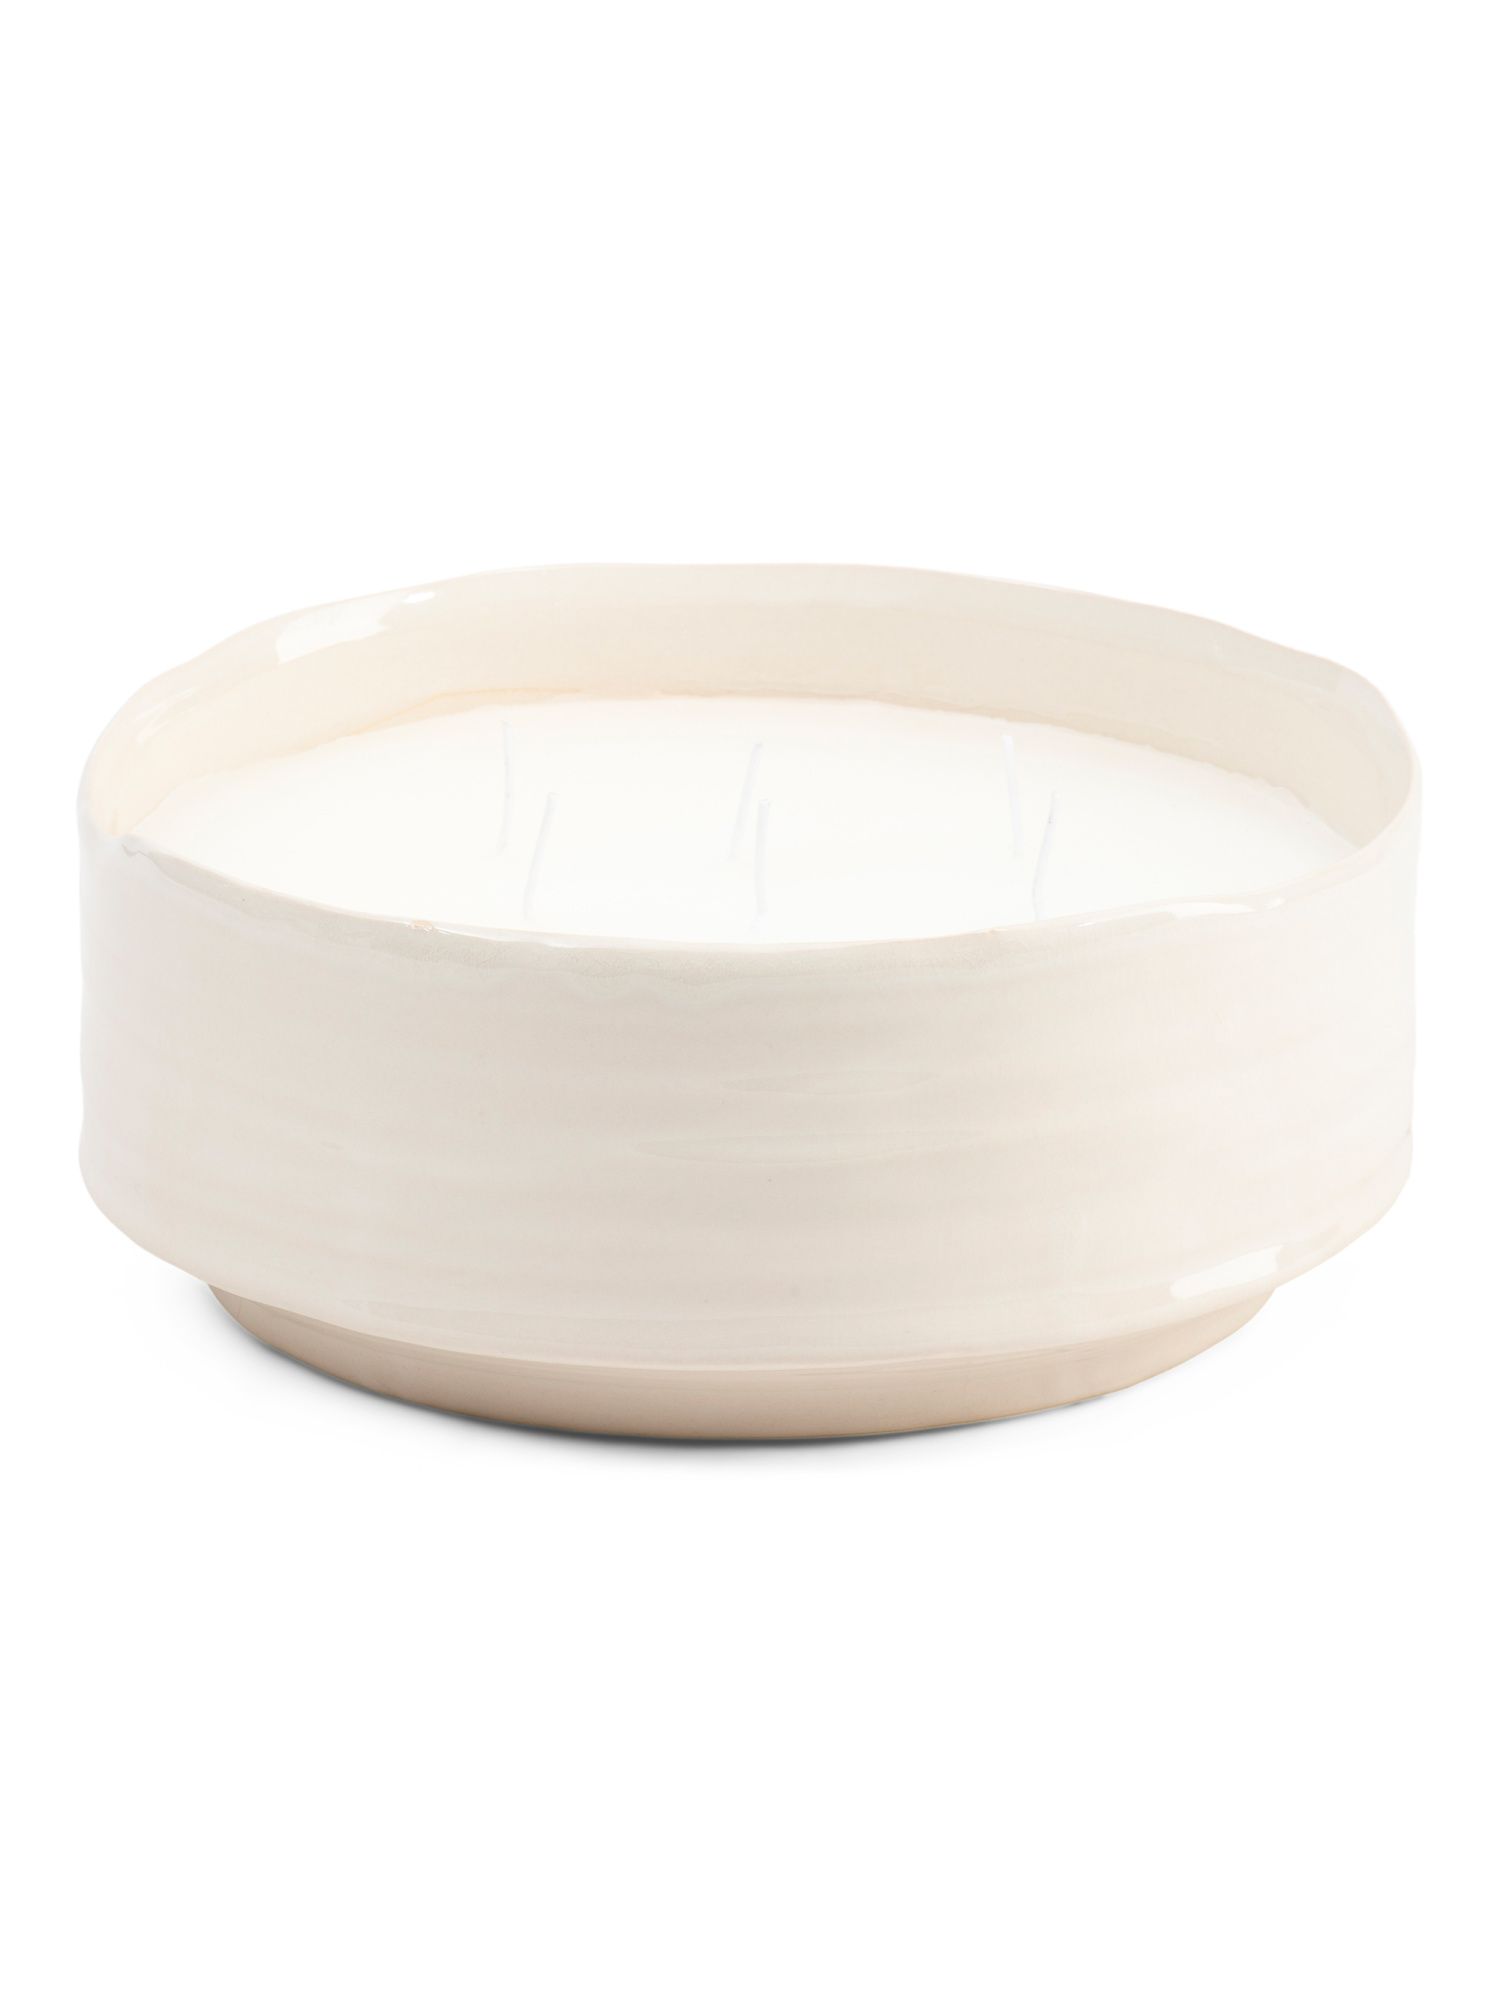 67oz 10in 6 Wick Low Bowl Citronella Candle | Marshalls